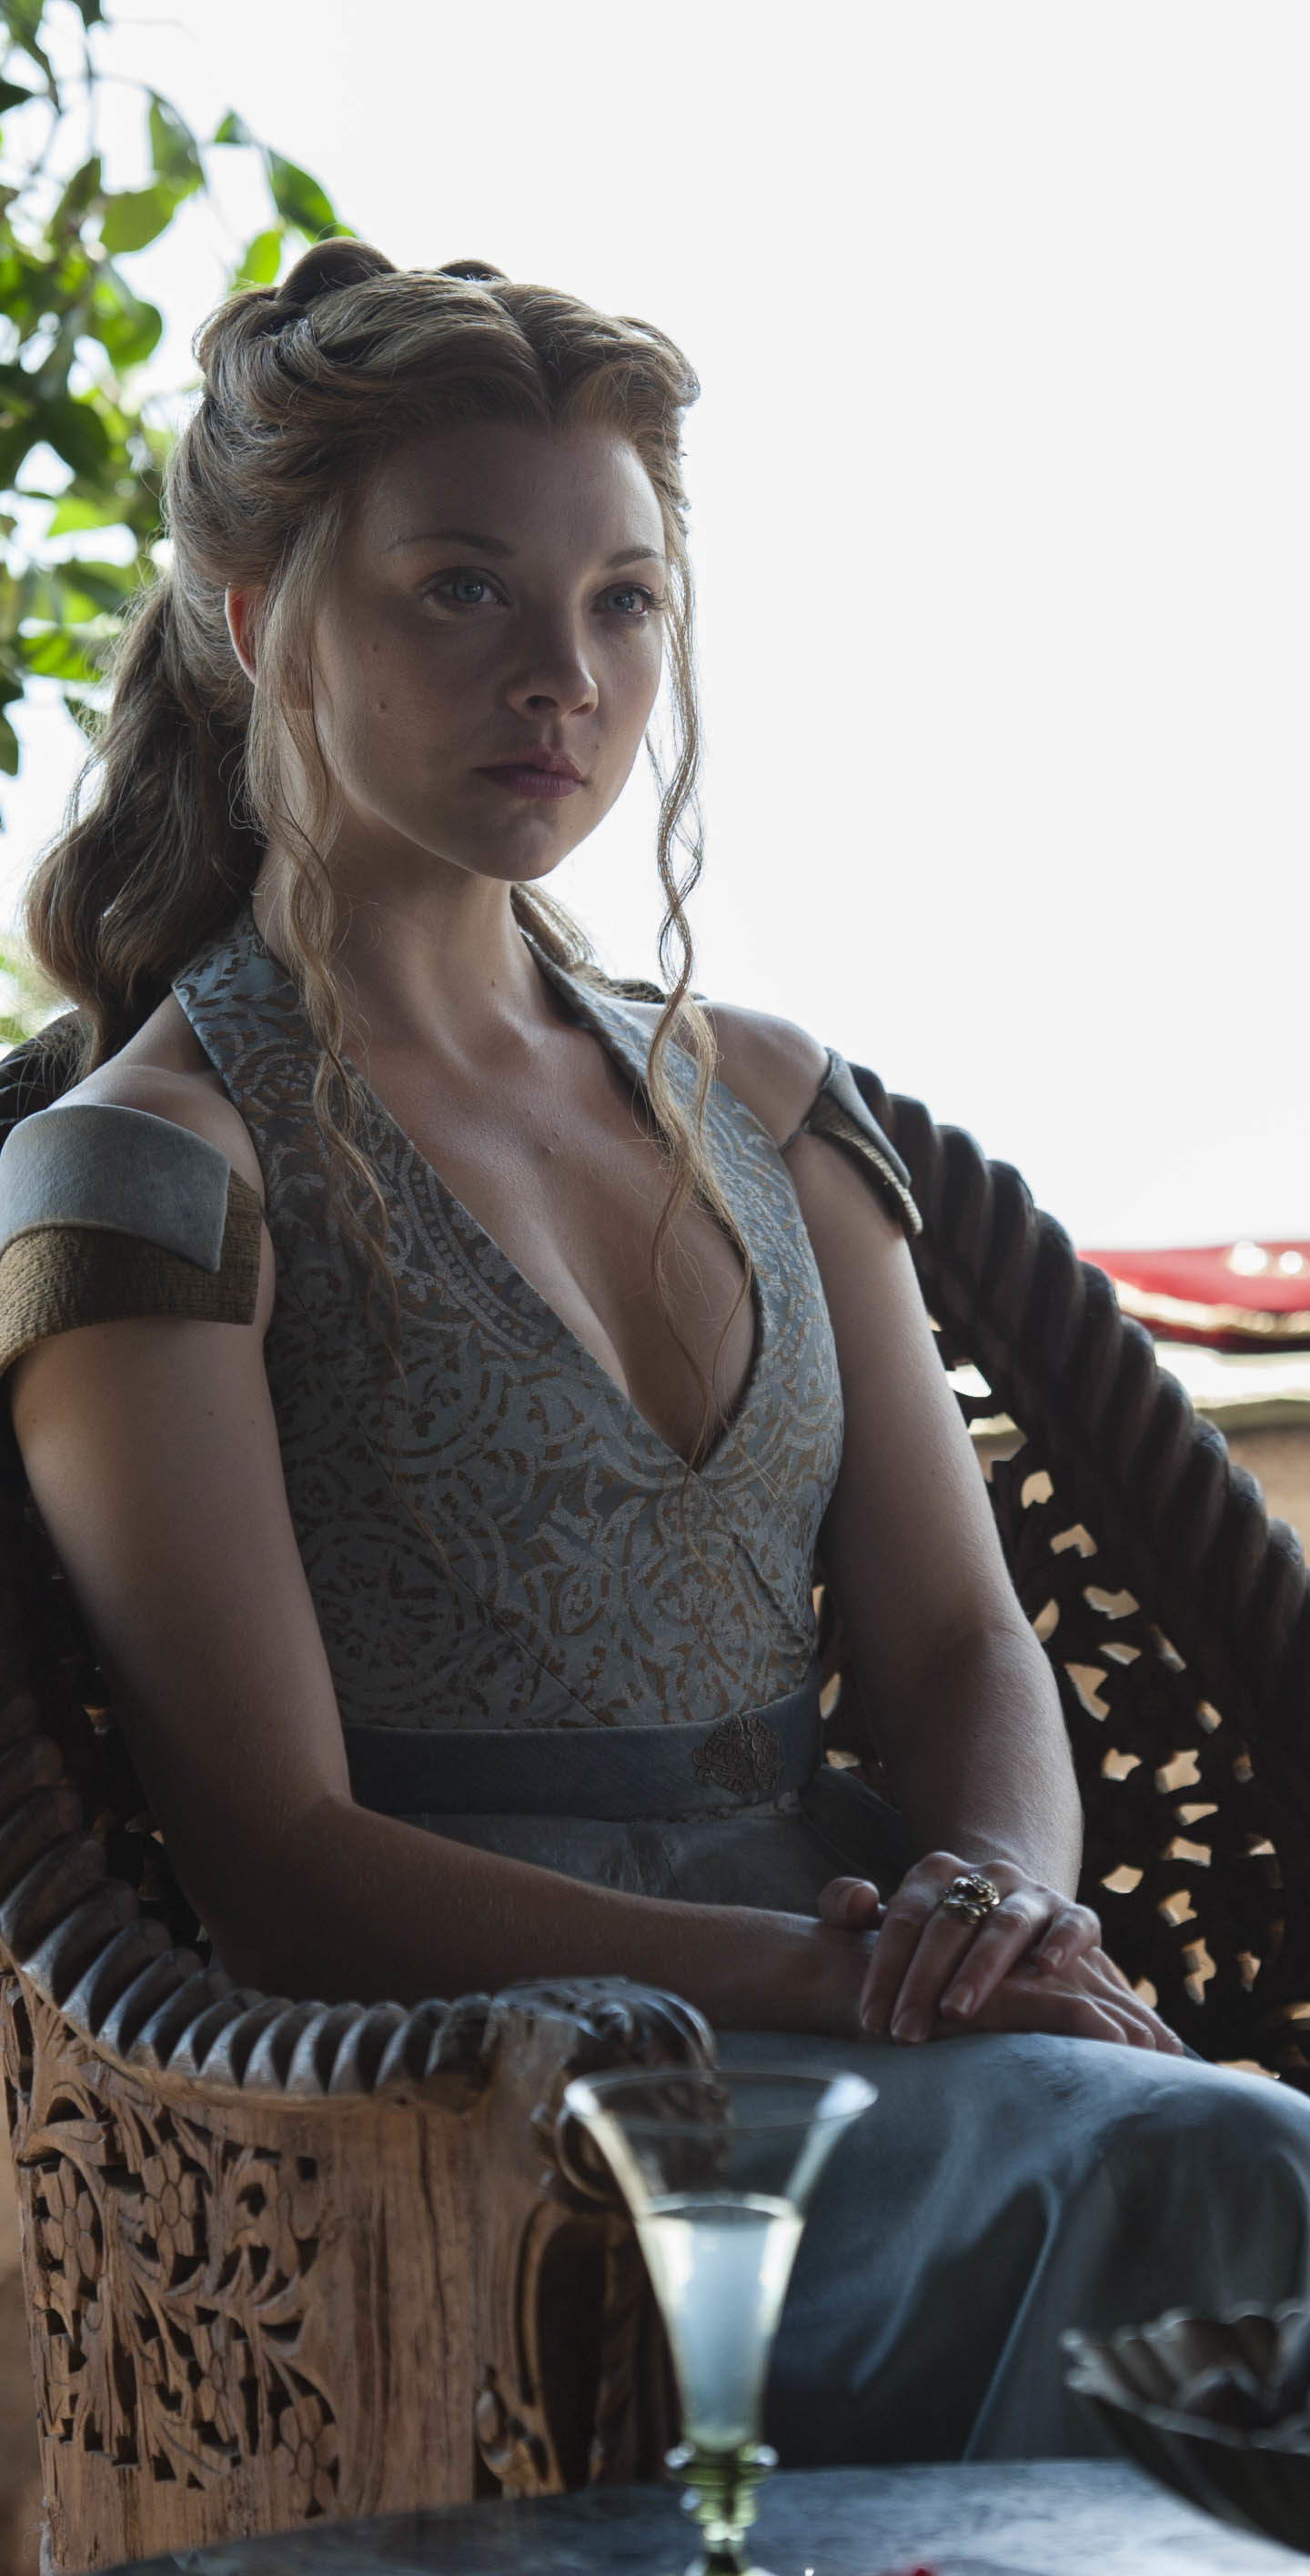 Game of Thrones: Margaery Tyrell, portrayed by Natalie Dormer, TV show. 1440x2840 HD Background.